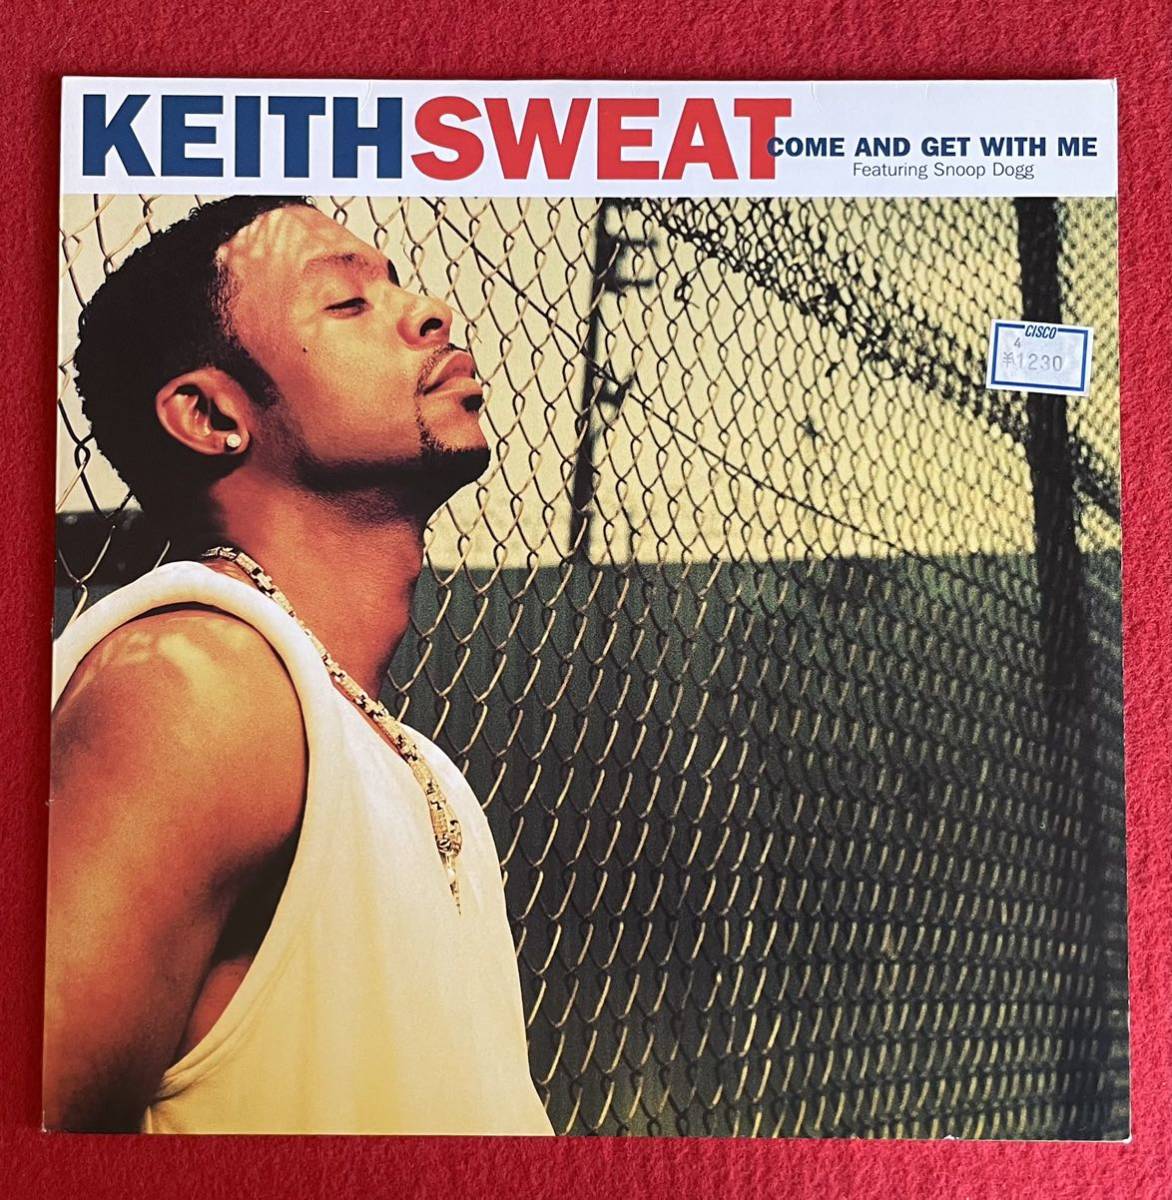 Keith Sweat Featuring Snoop Dogg / Come Get Wit Me 12inch盤 その他にもプロモーション盤 レア盤 人気レコード 多数出品。_画像1